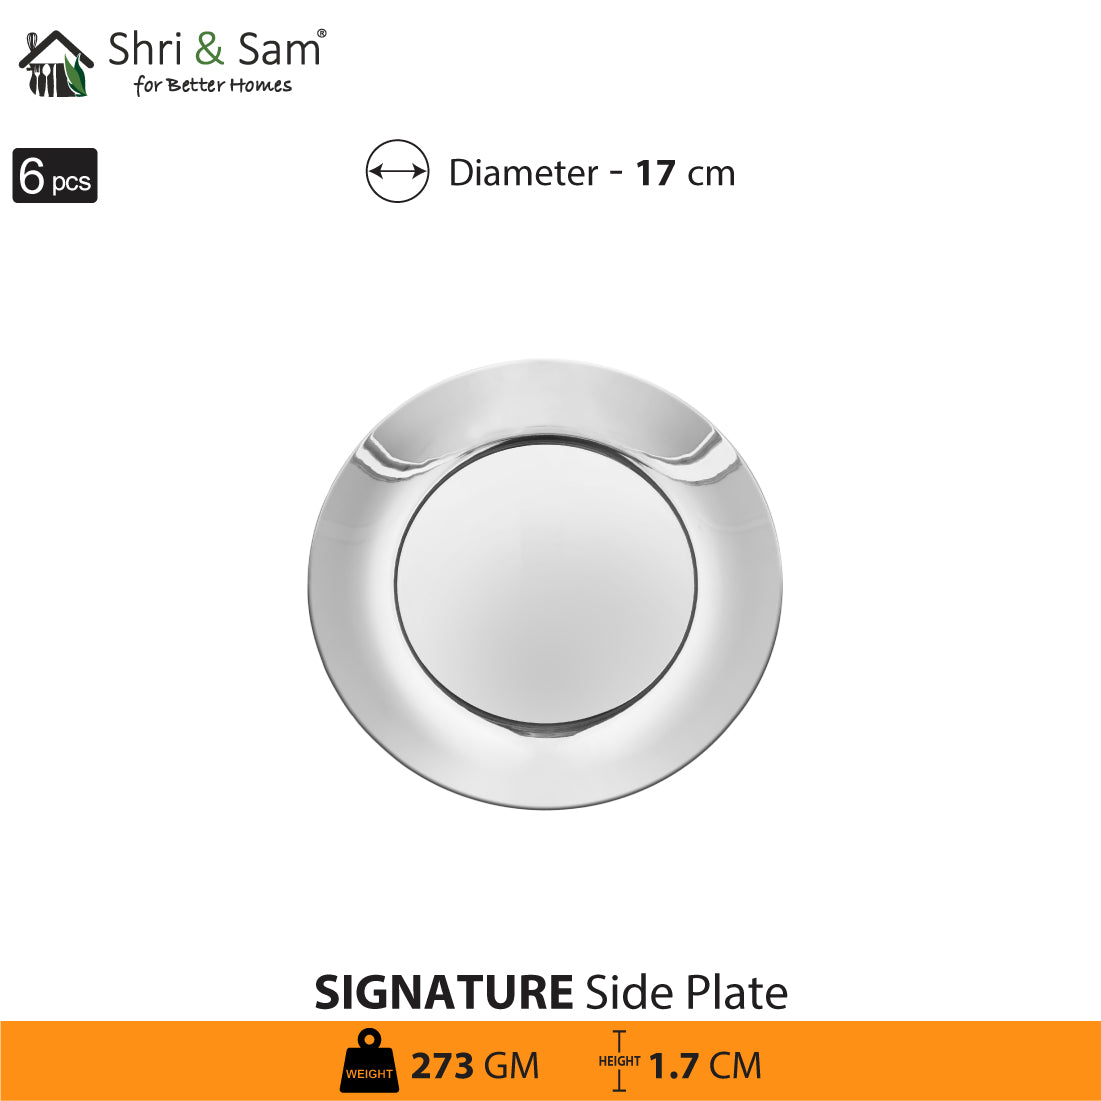 Stainless Steel 6 PCS Side Plate Signature - Shiny